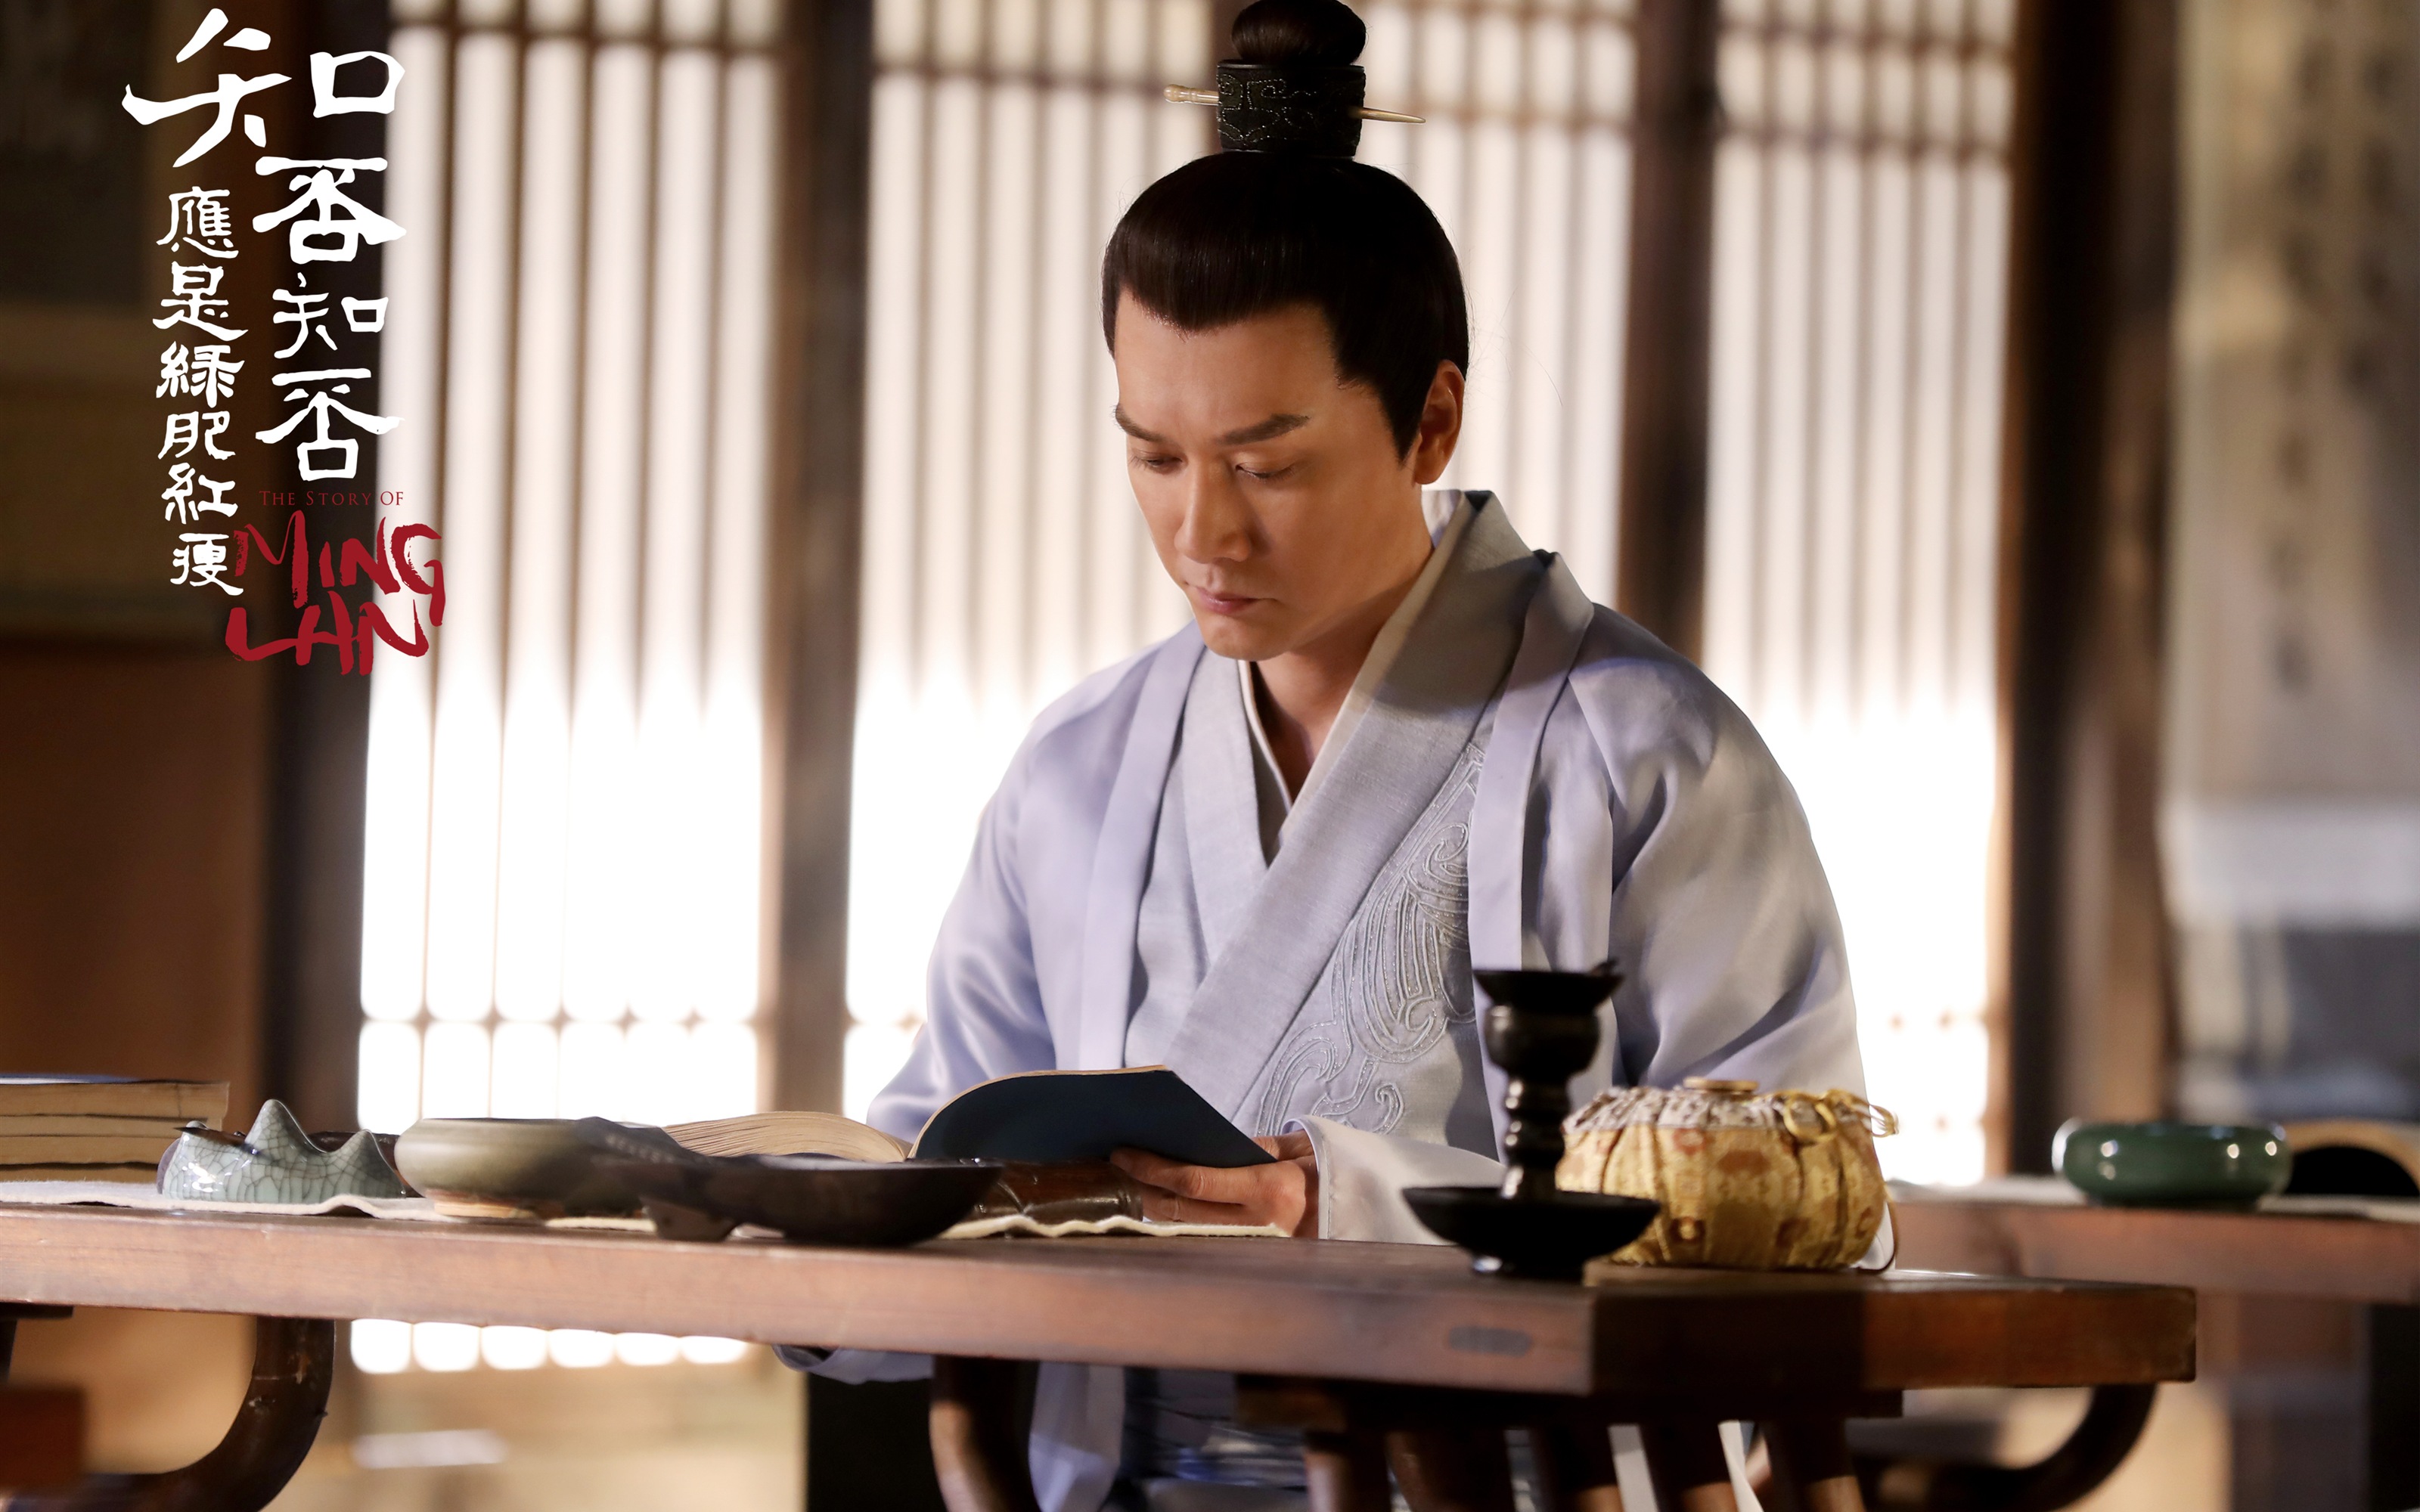 The Story Of MingLan, TV series HD wallpapers #56 - 3200x2000